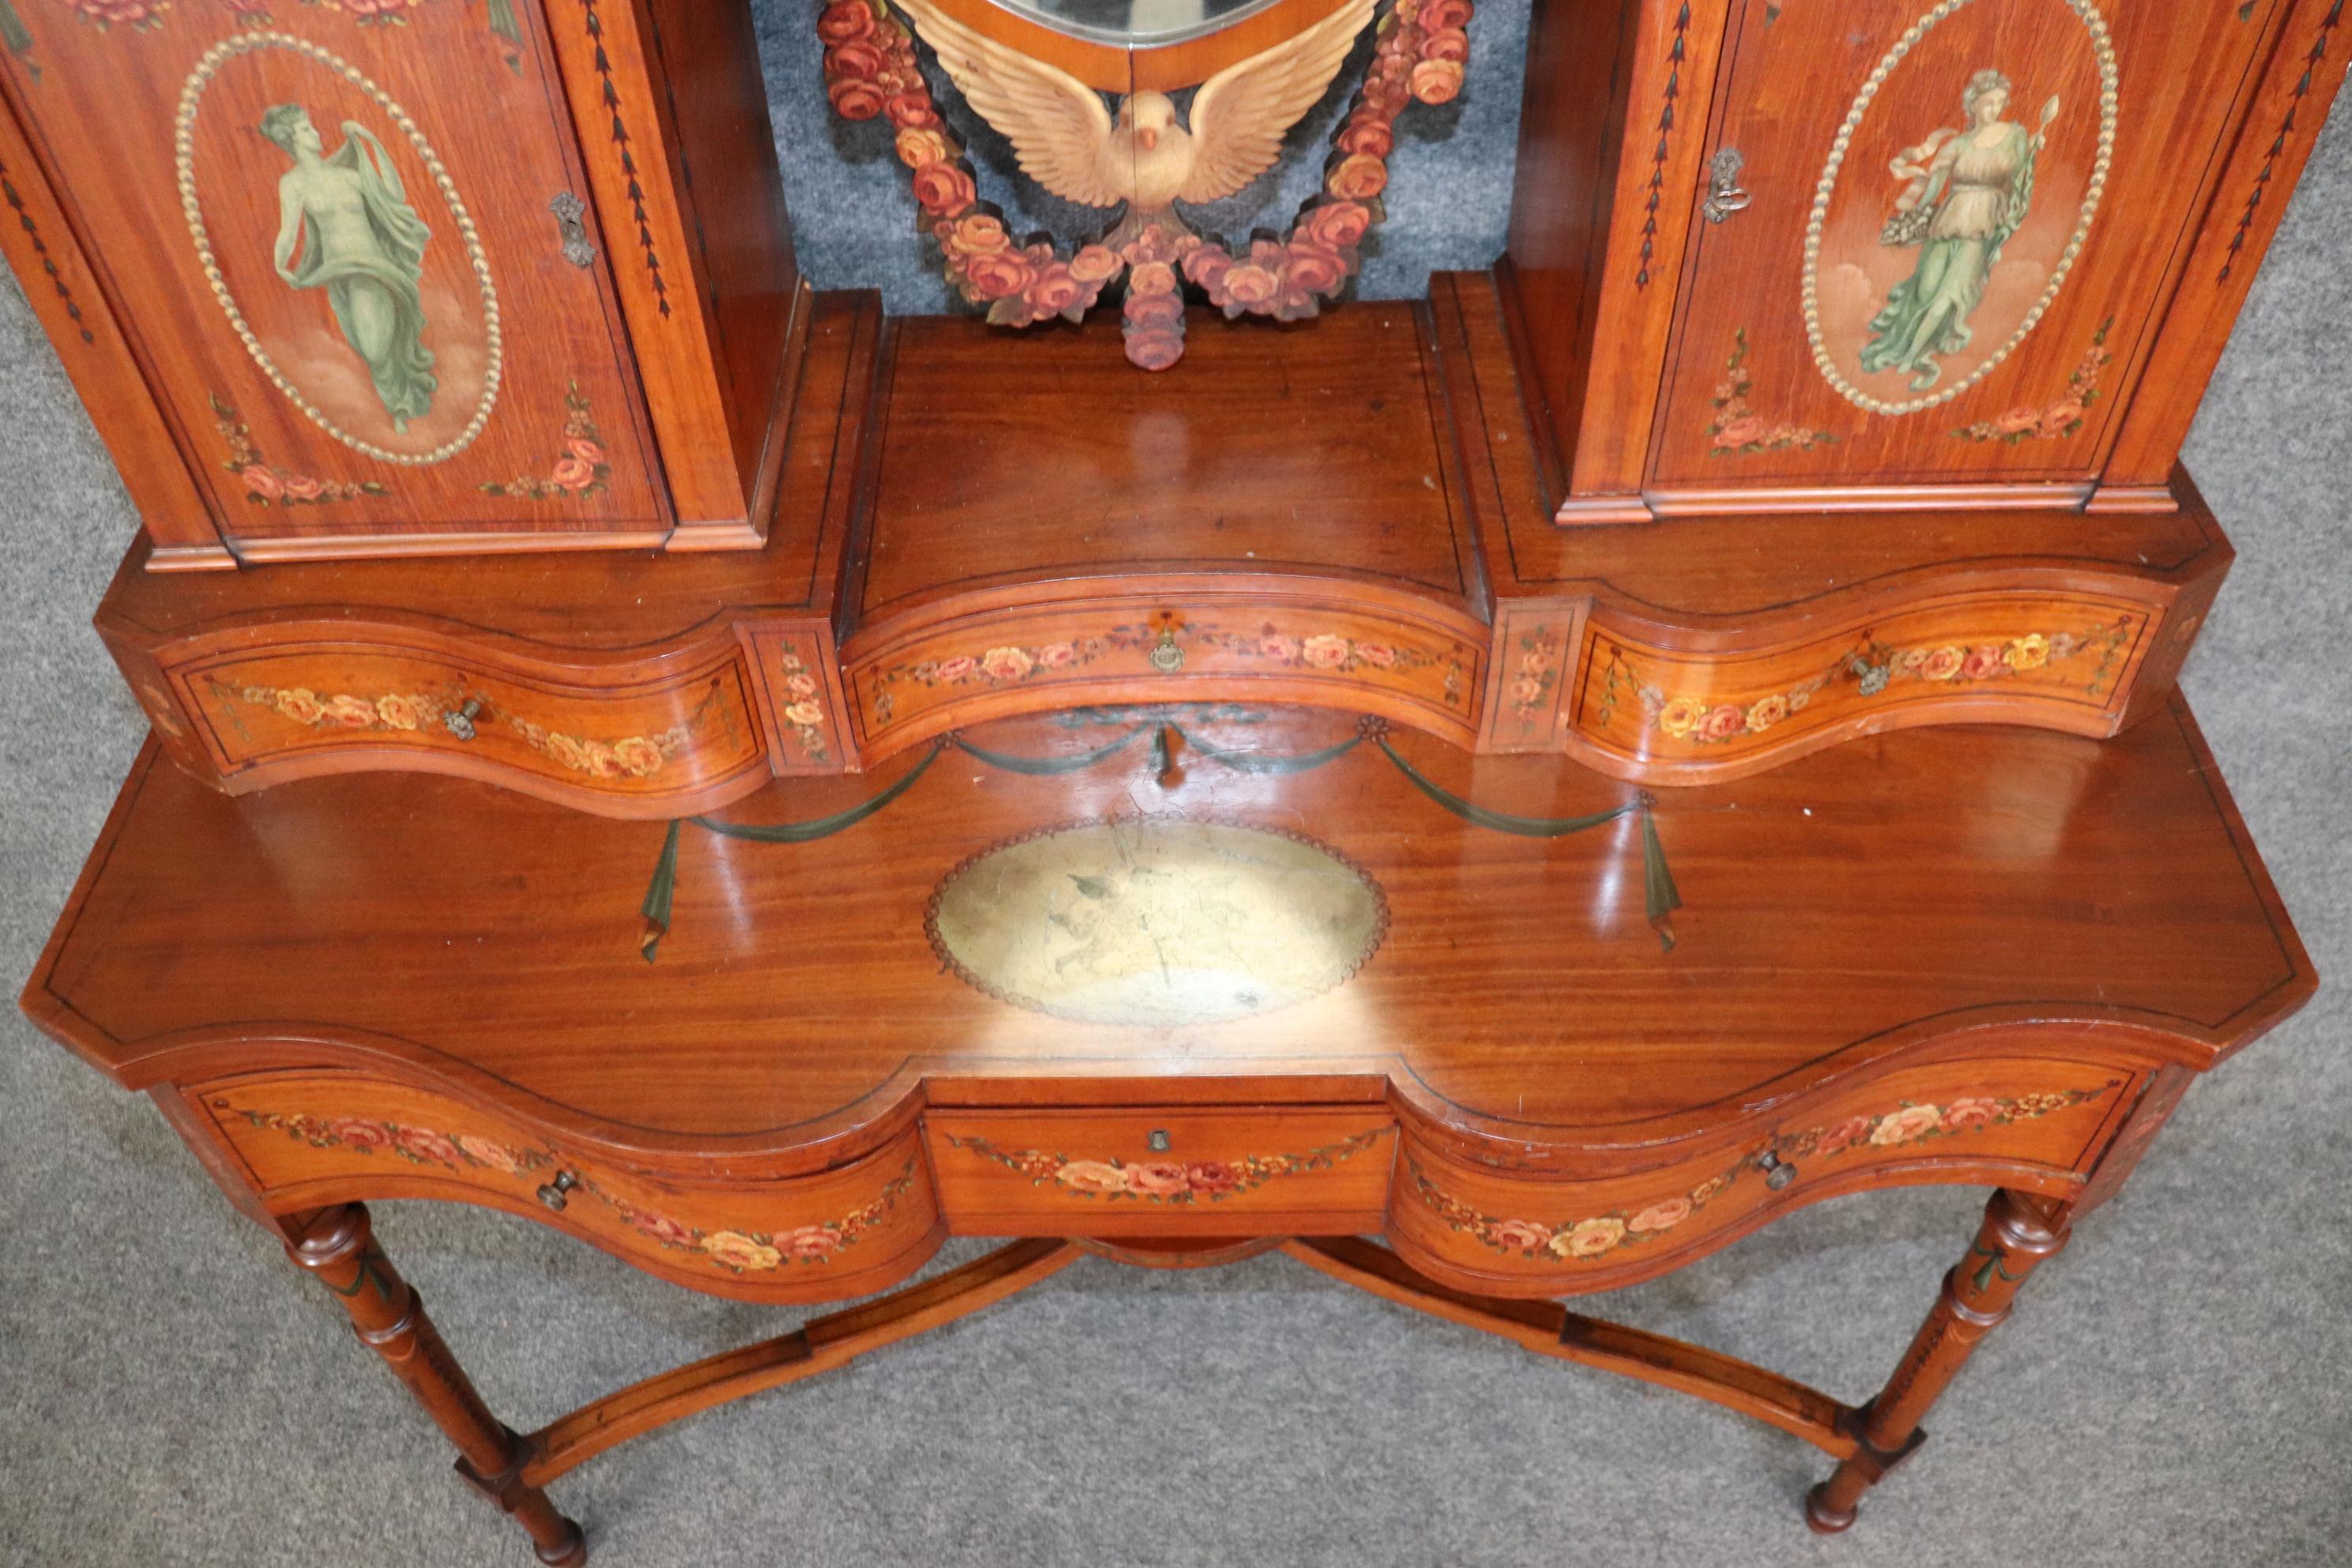 Fine Quality Gillow & Co Satinwood Paint Decorated Ladies Vanity Circa 1890s For Sale 8